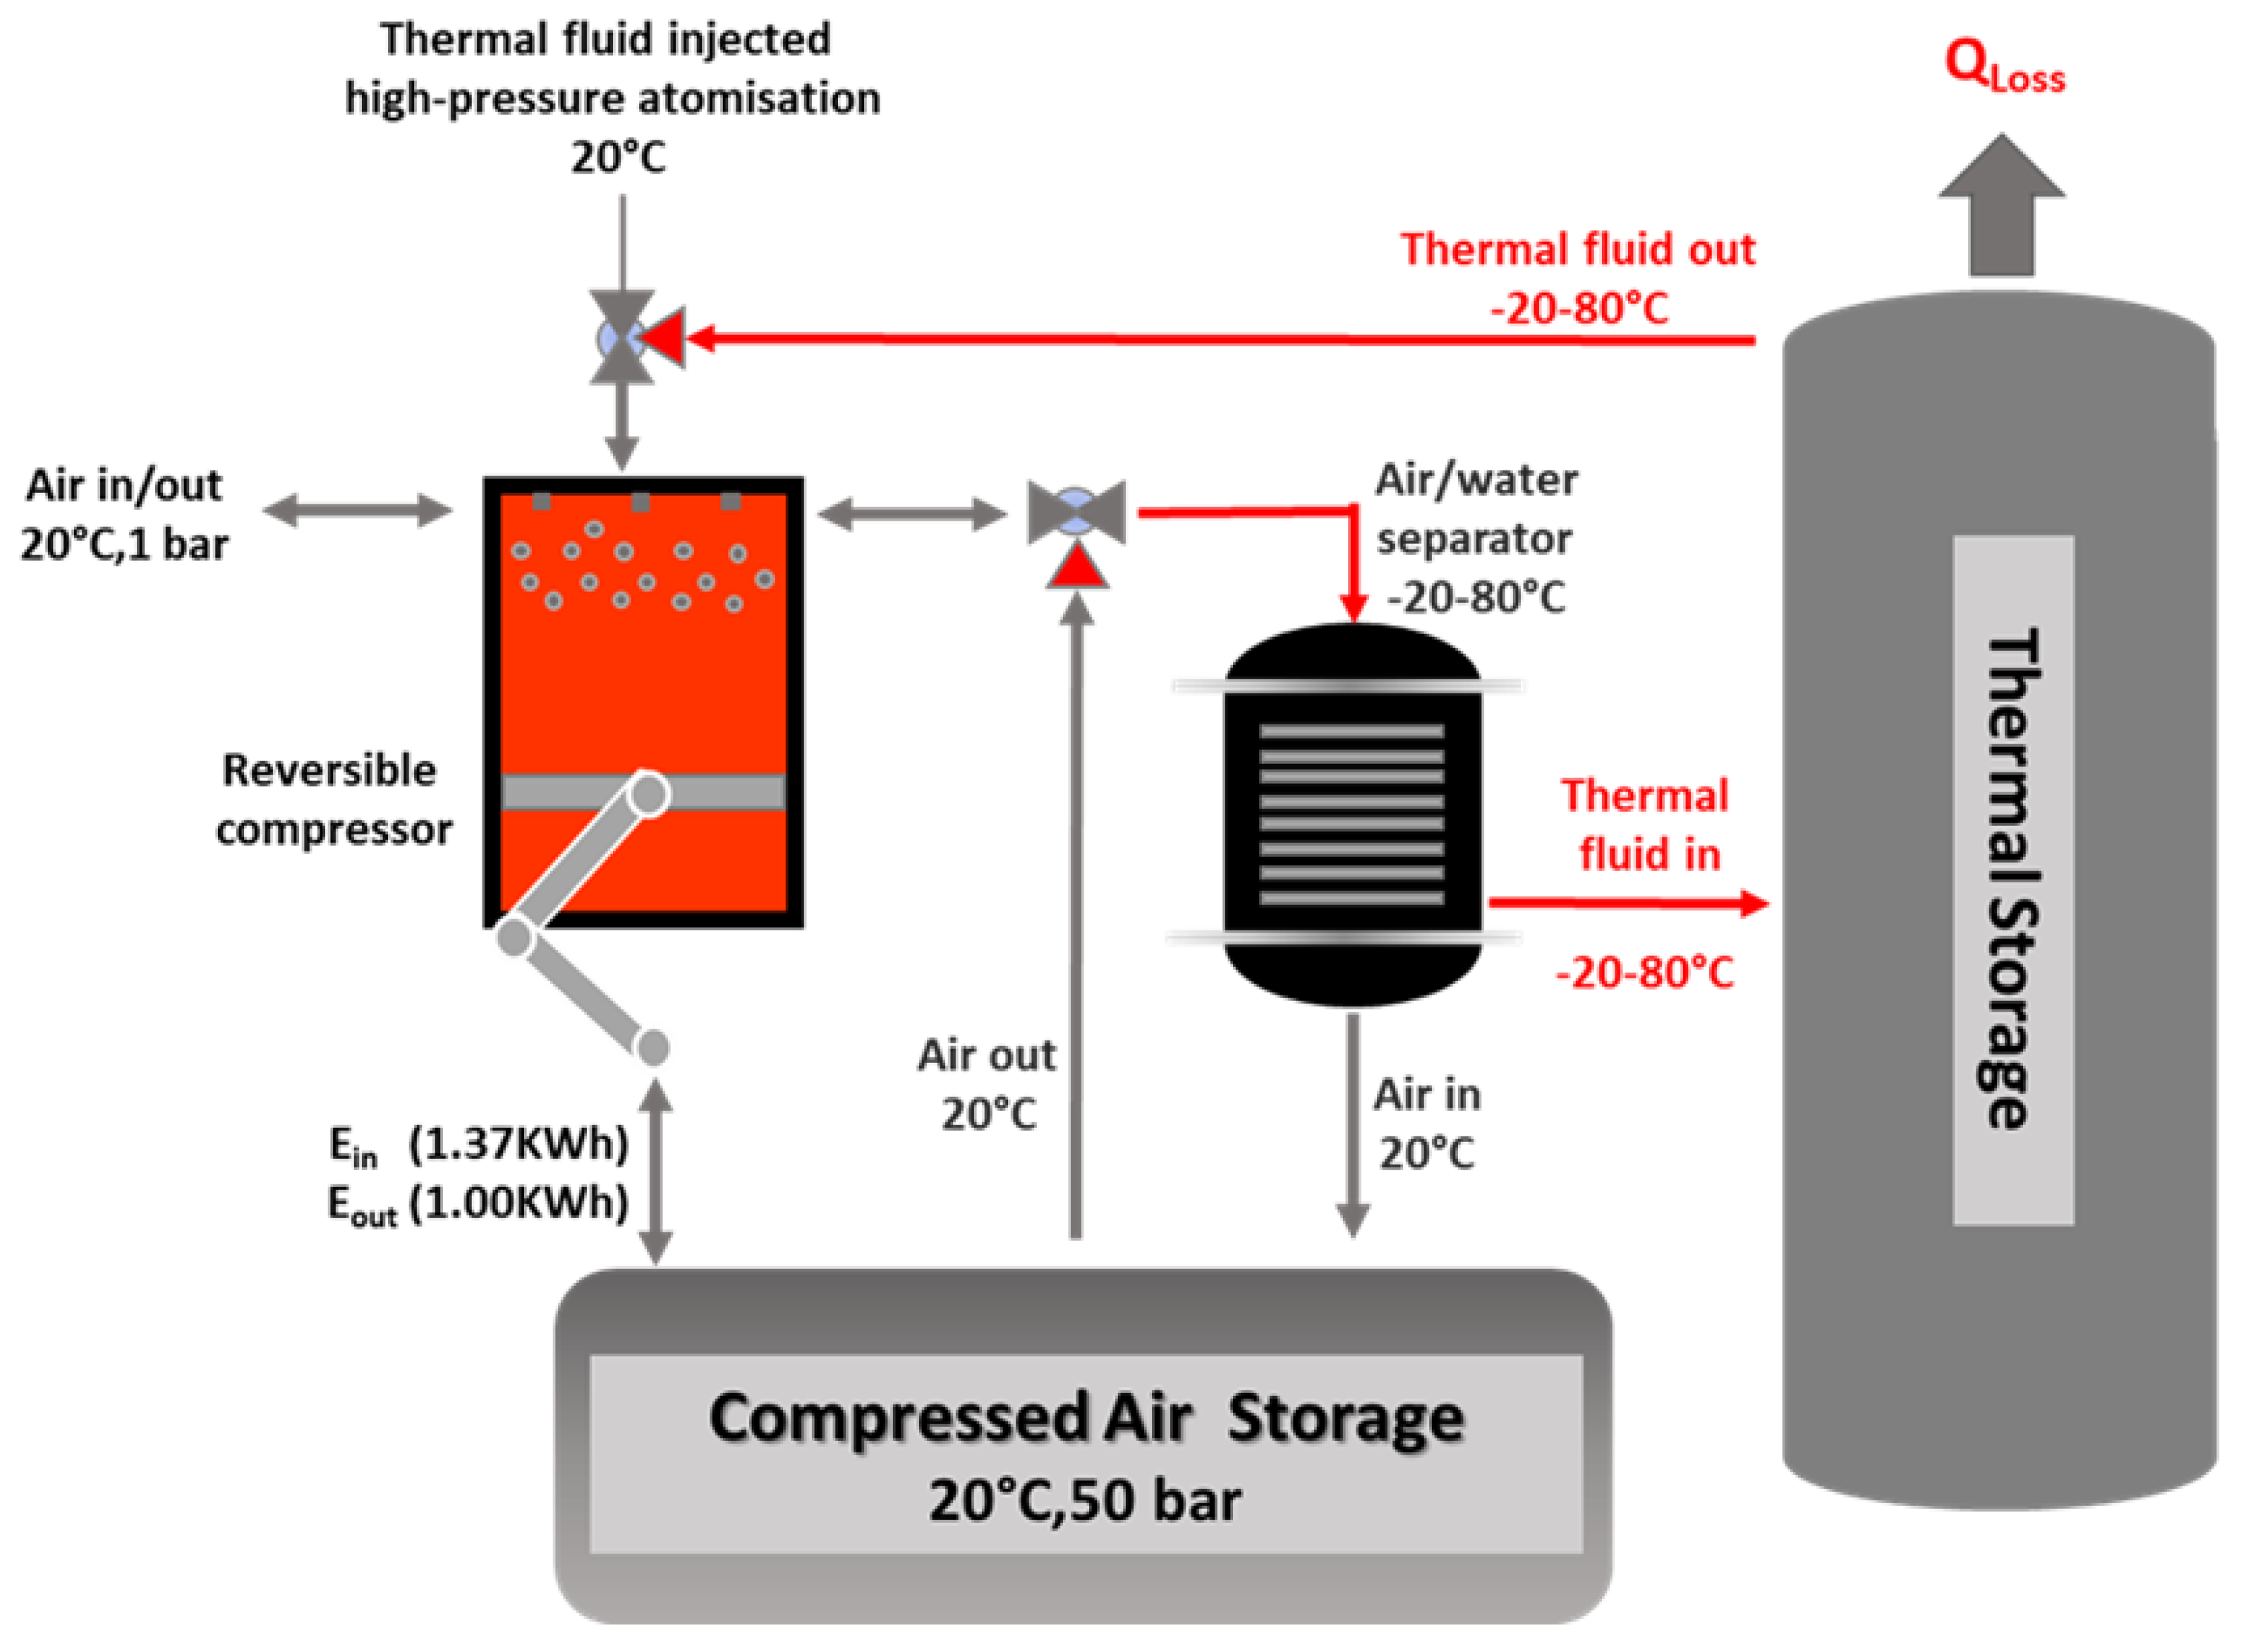 https://www.mdpi.com/thermo/thermo-03-00008/article_deploy/html/images/thermo-03-00008-g008.png